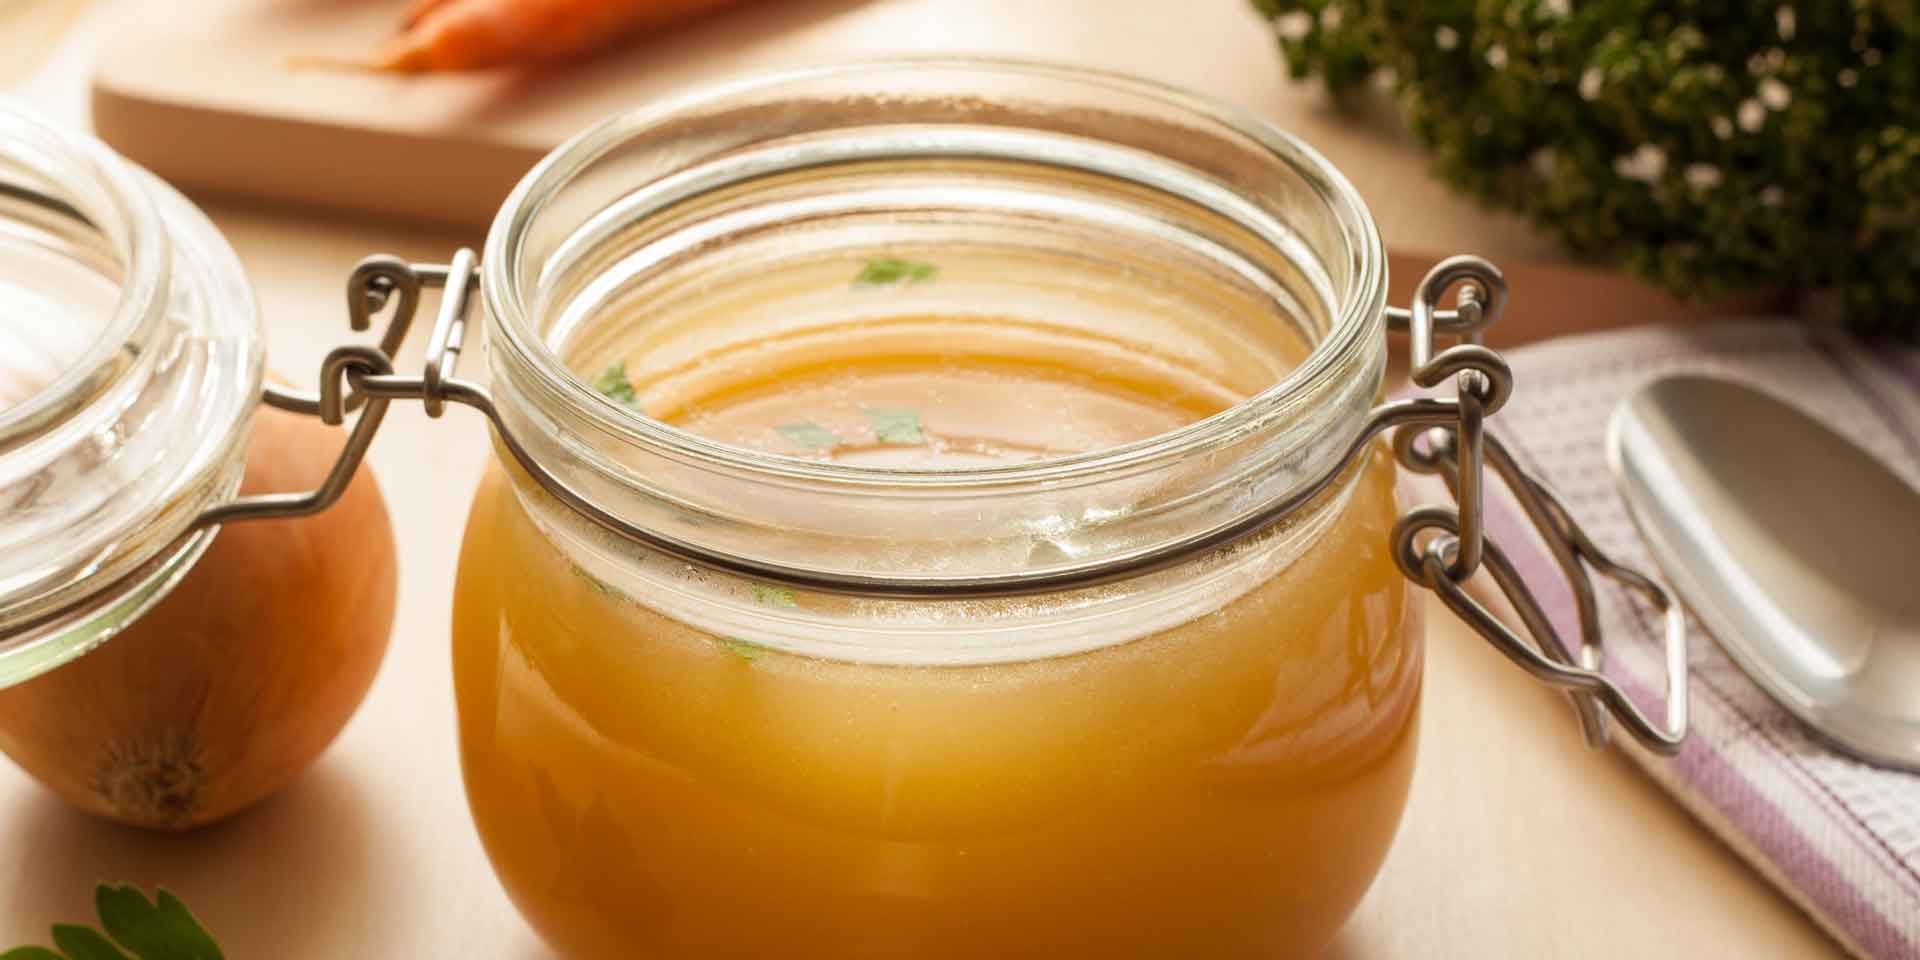 A jar of homemade chicken broth, infused with metaphysical herbs, ready to enhance the flavor of various dishes.